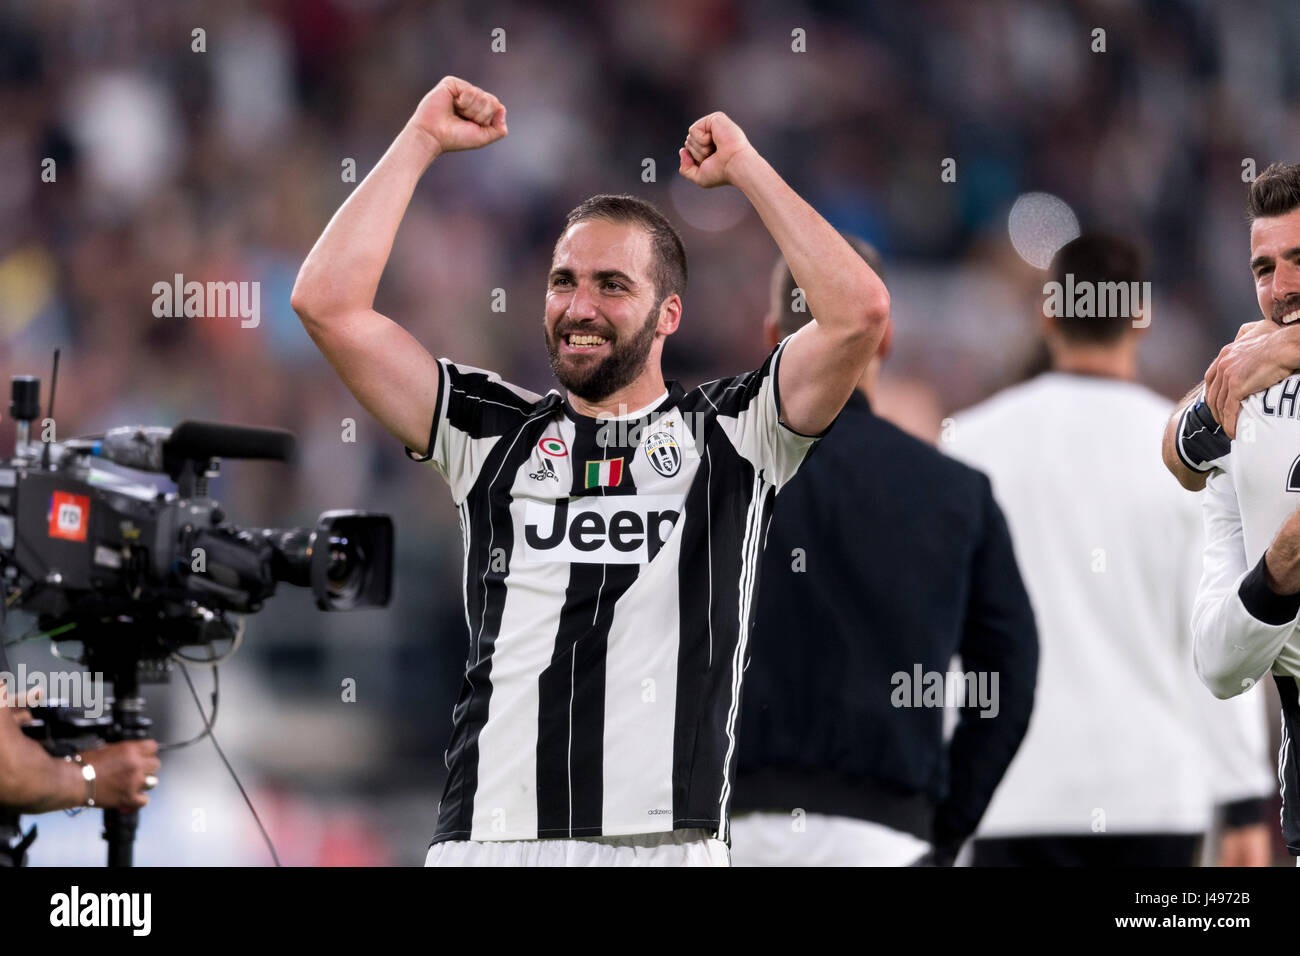 Turin, Italy. 9th May, 2017. Gonzalo Higuain (Juventus) Football/Soccer : Gonzalo Higuain of Juventus celebrates after the UEFA Champions League Semi-finals 2nd leg match between Juventus 2-1 AS Monaco at Juventus Stadium in Turin, Italy . Credit: Maurizio Borsari/AFLO/Alamy Live News Stock Photo